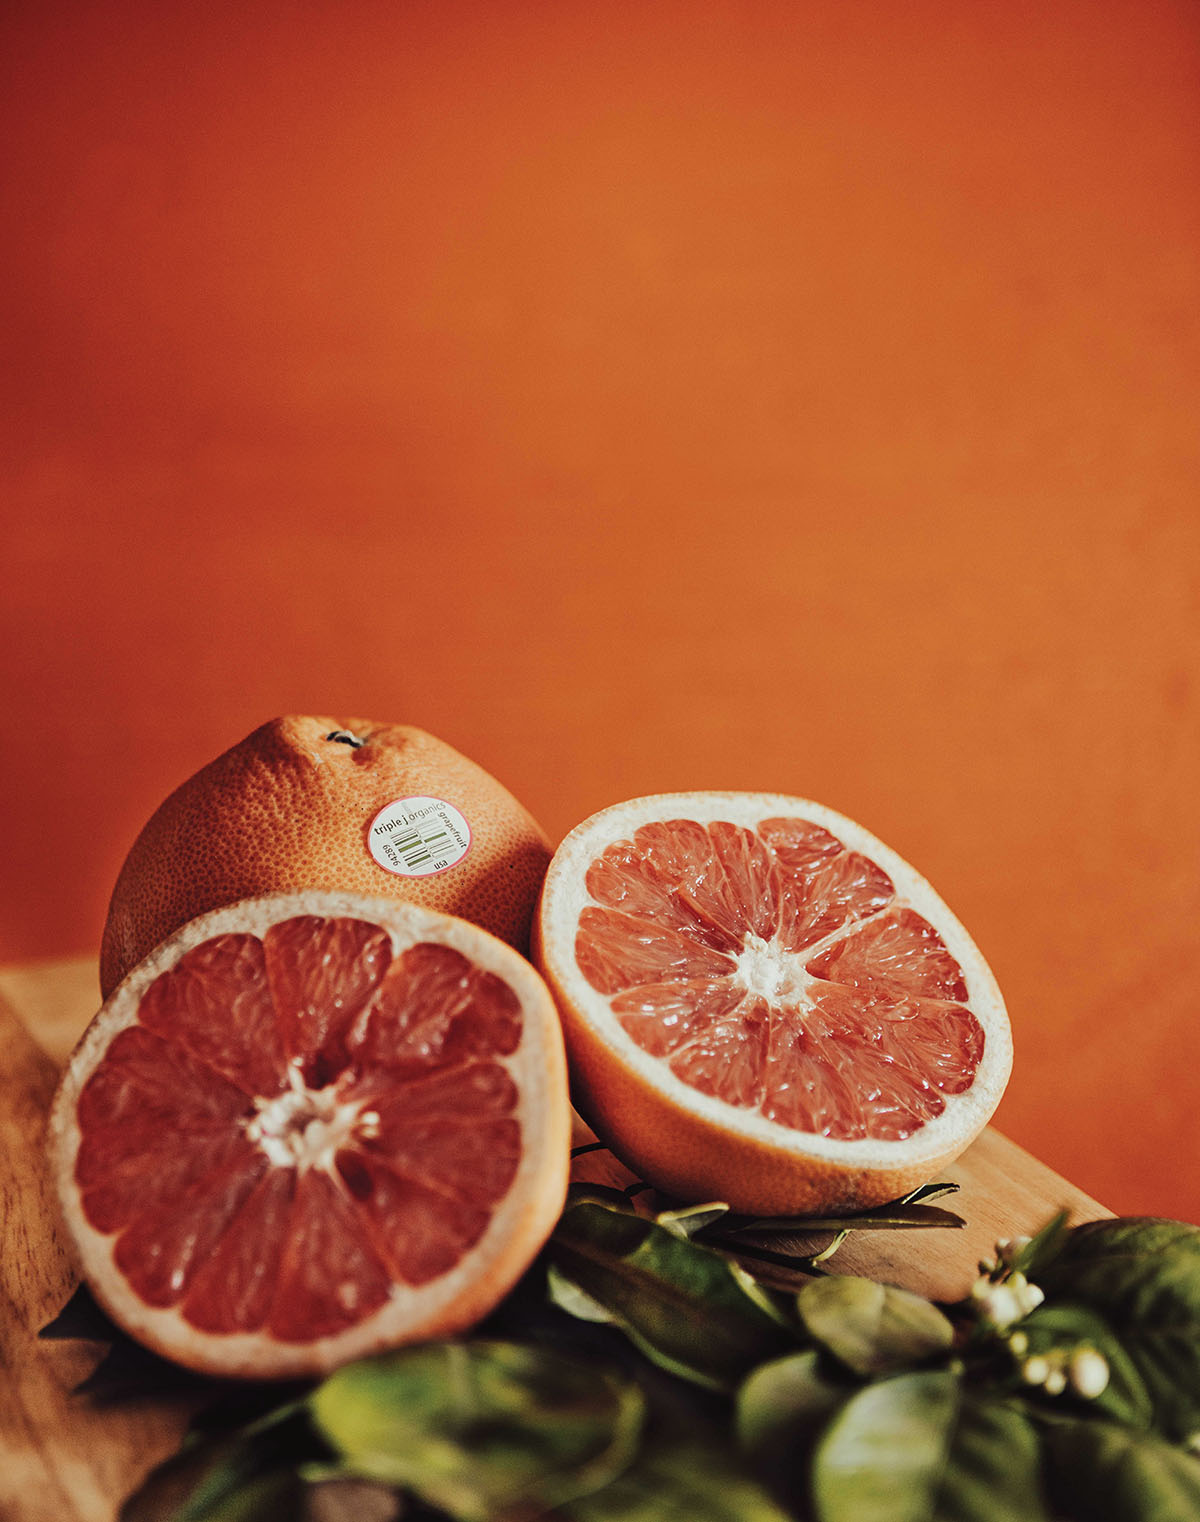 A bright red grapefruit split in half on a wooden cutting board in front of an orange wall